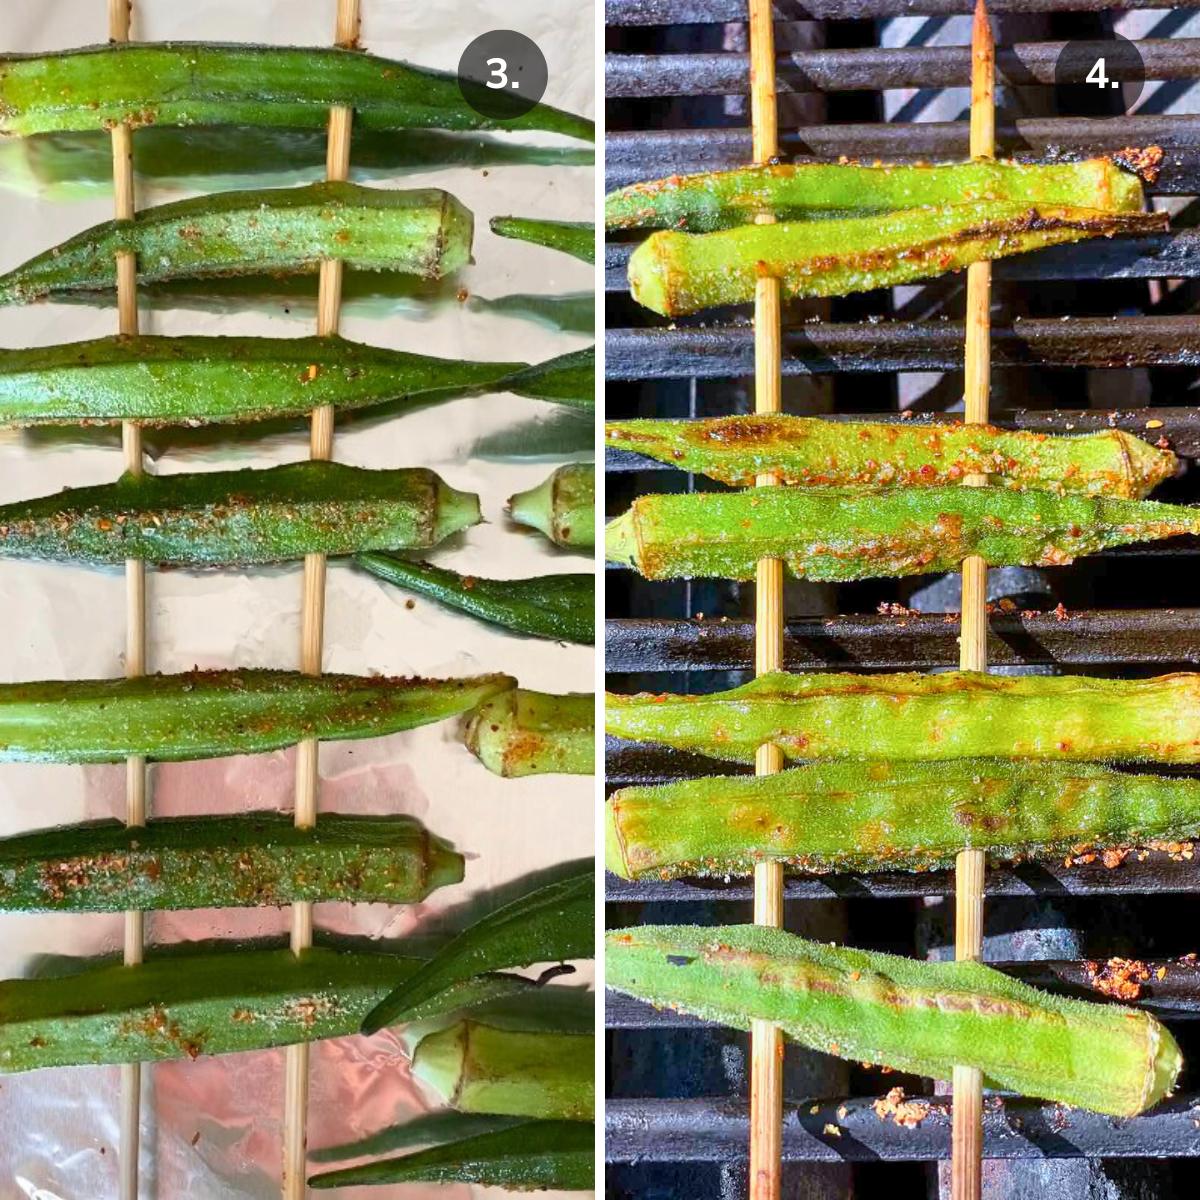 Okra on 2 wooden skewers before and after grilled.